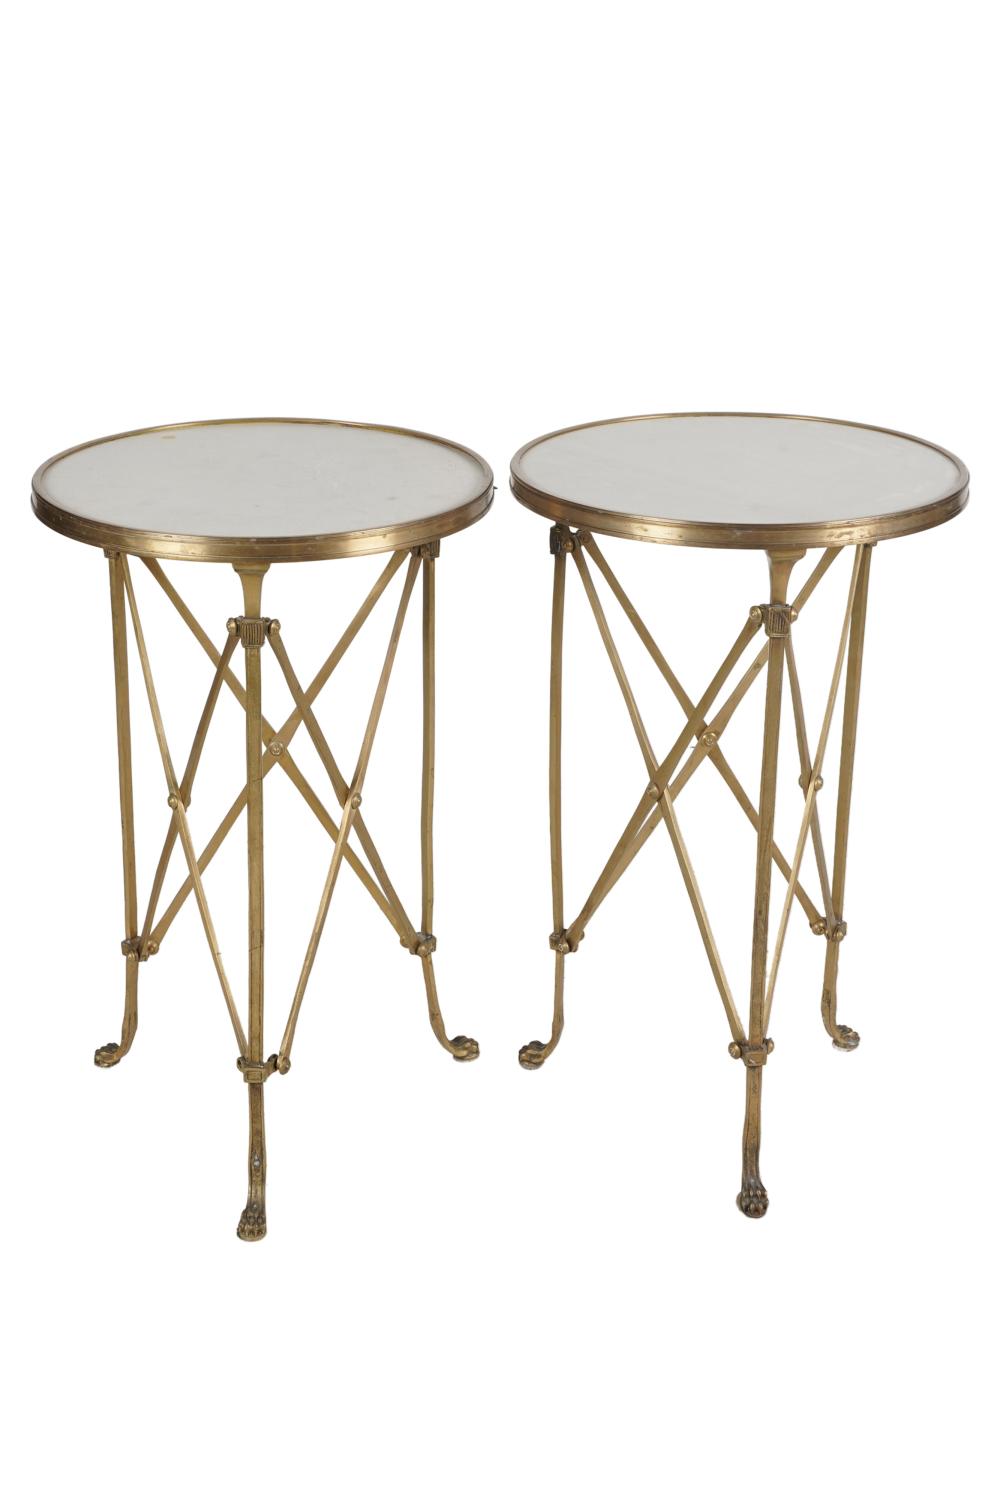 PAIR OF NEOCLASSIC STYLE GILT METAL 333968